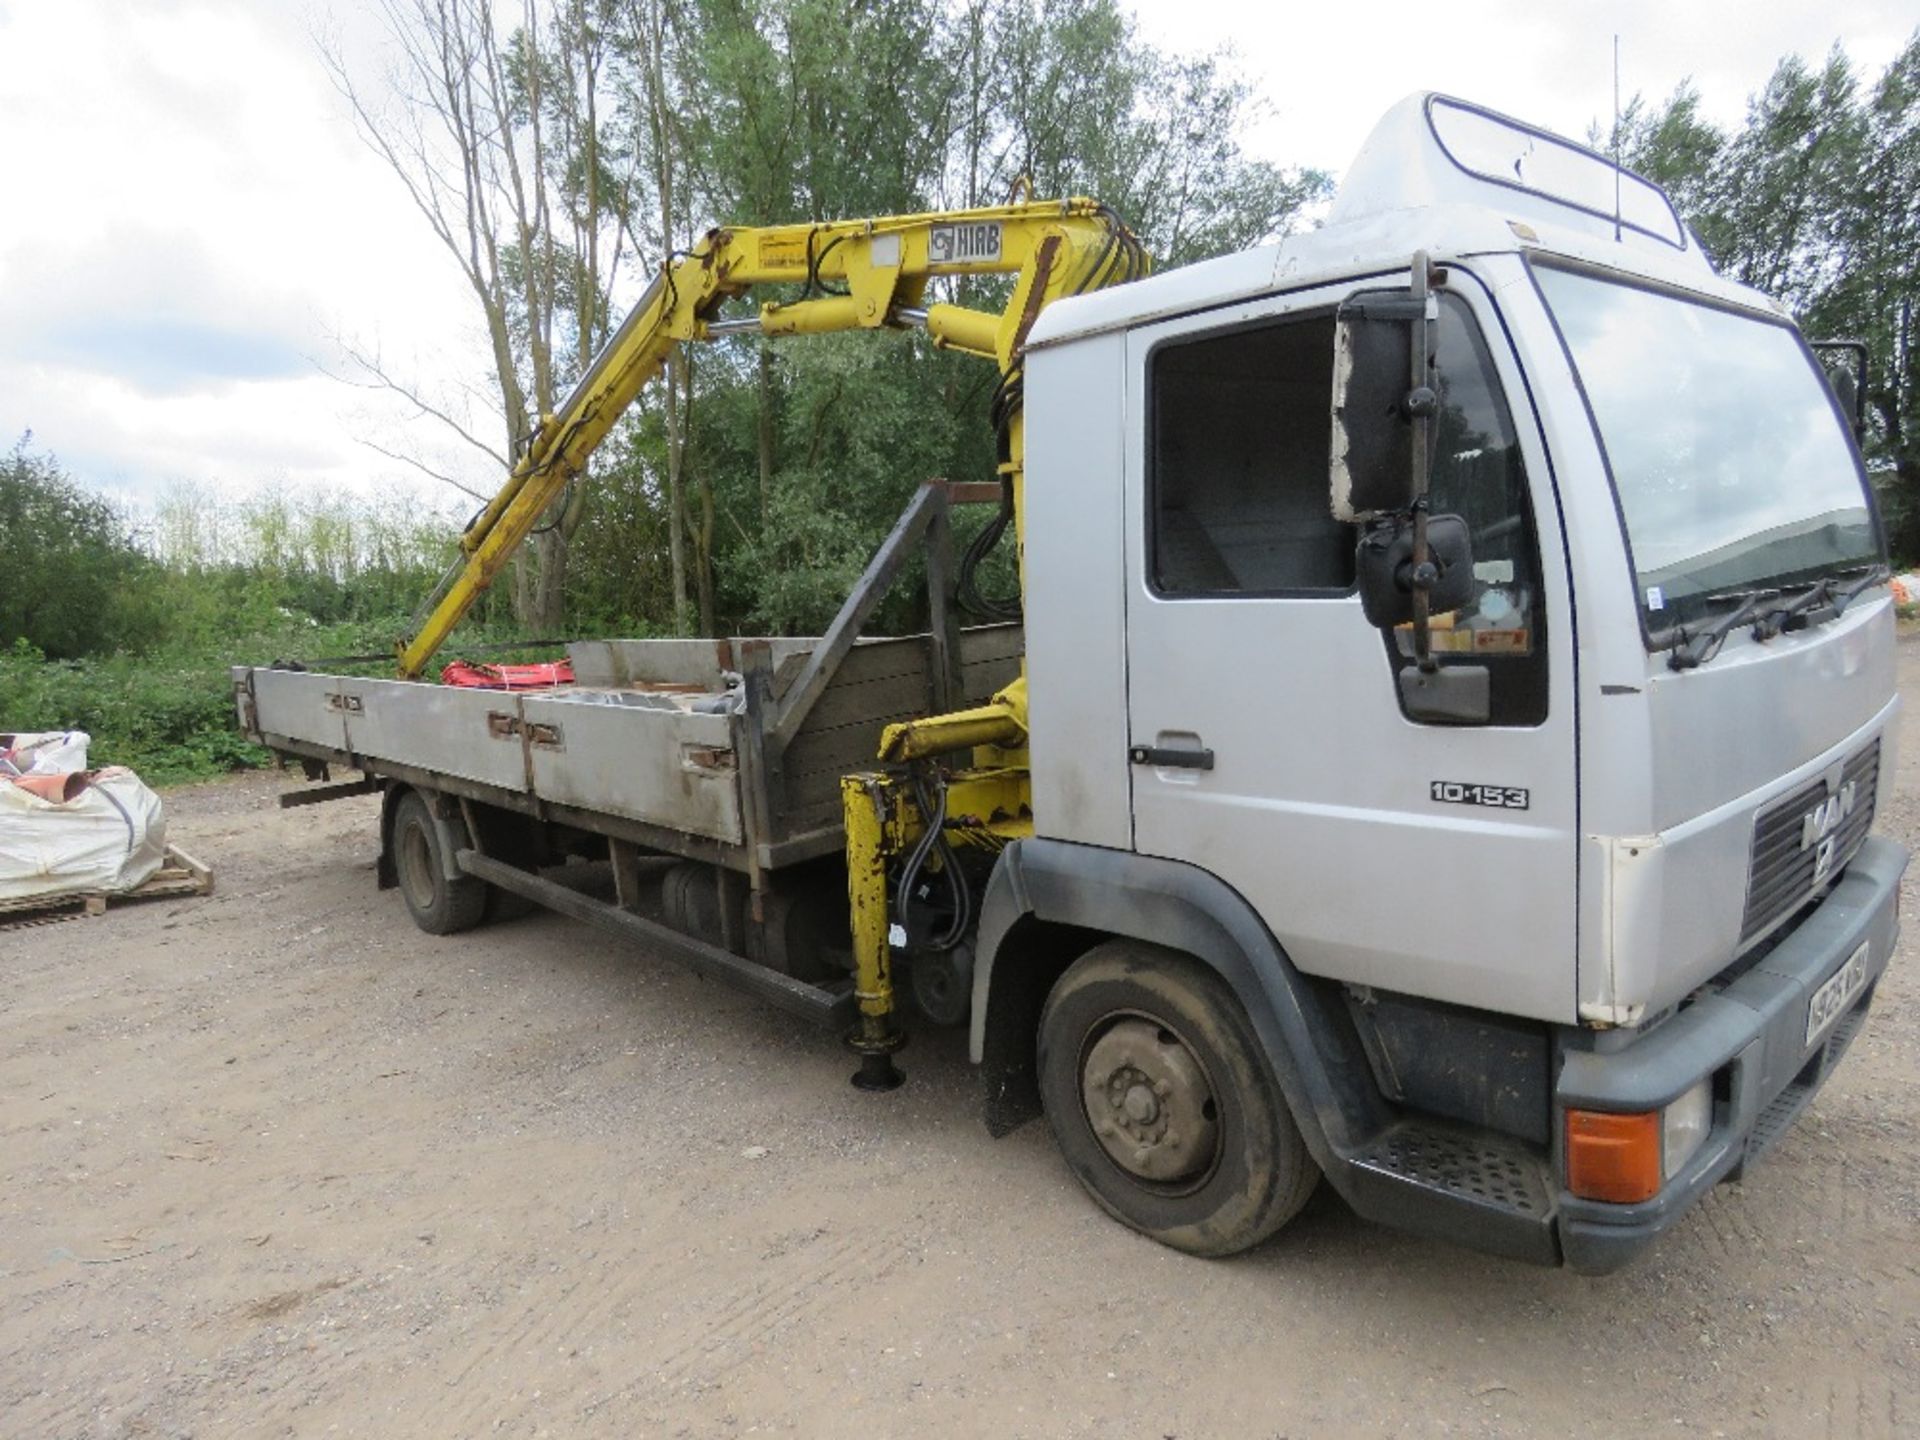 MAN 10-153 FLAT BED LORRY WITH HIAB CRANE REG:N825 WBU. 22FT BED APPROX. MANUAL GEARBOX. WHEN TESTE